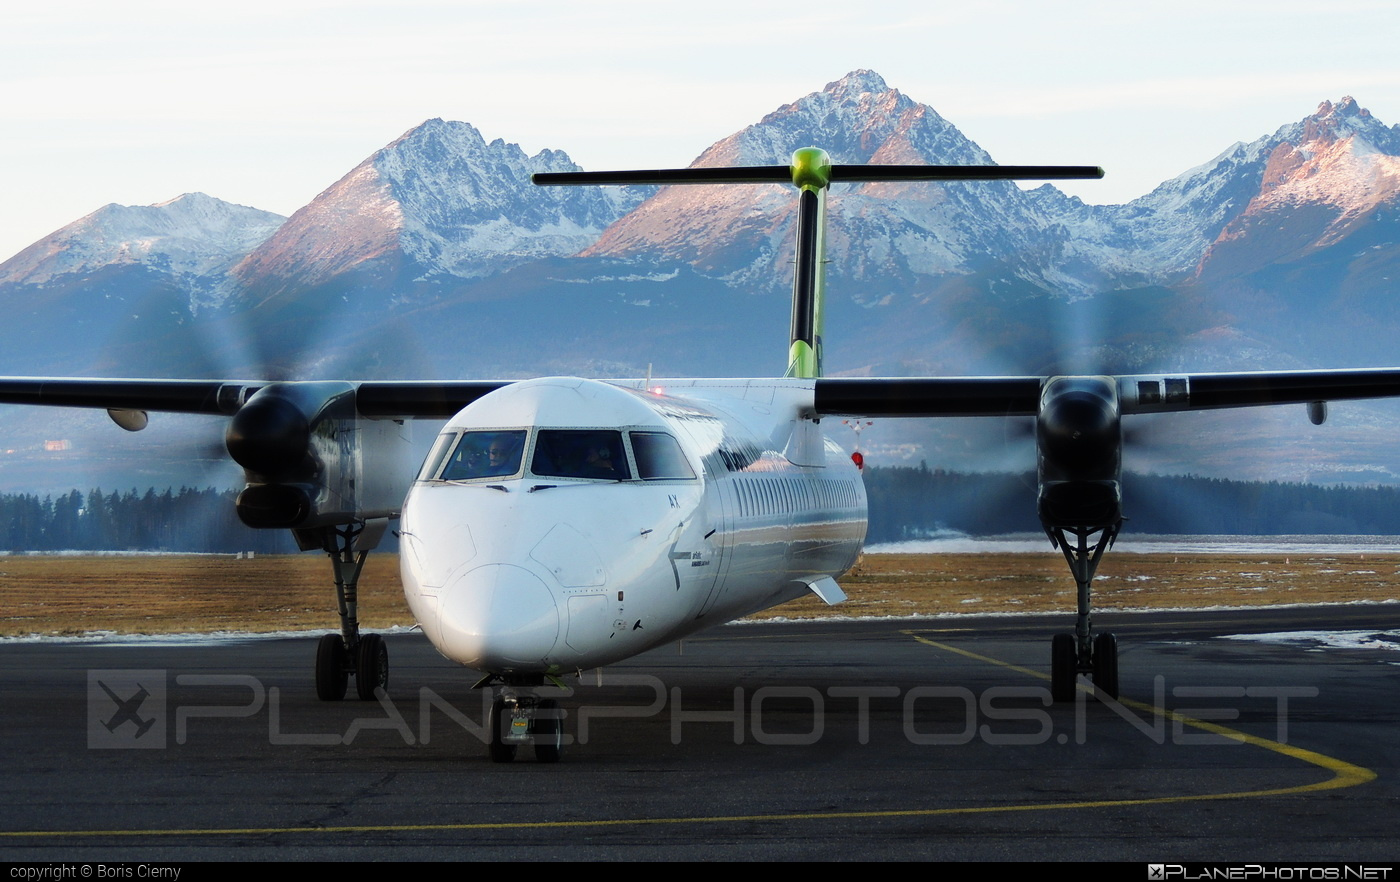 Bombardier DHC-8-Q402 Dash 8 - YL-BAX operated by Air Baltic #airbaltic #bombardier #dash8 #dhc8 #dhc8q402